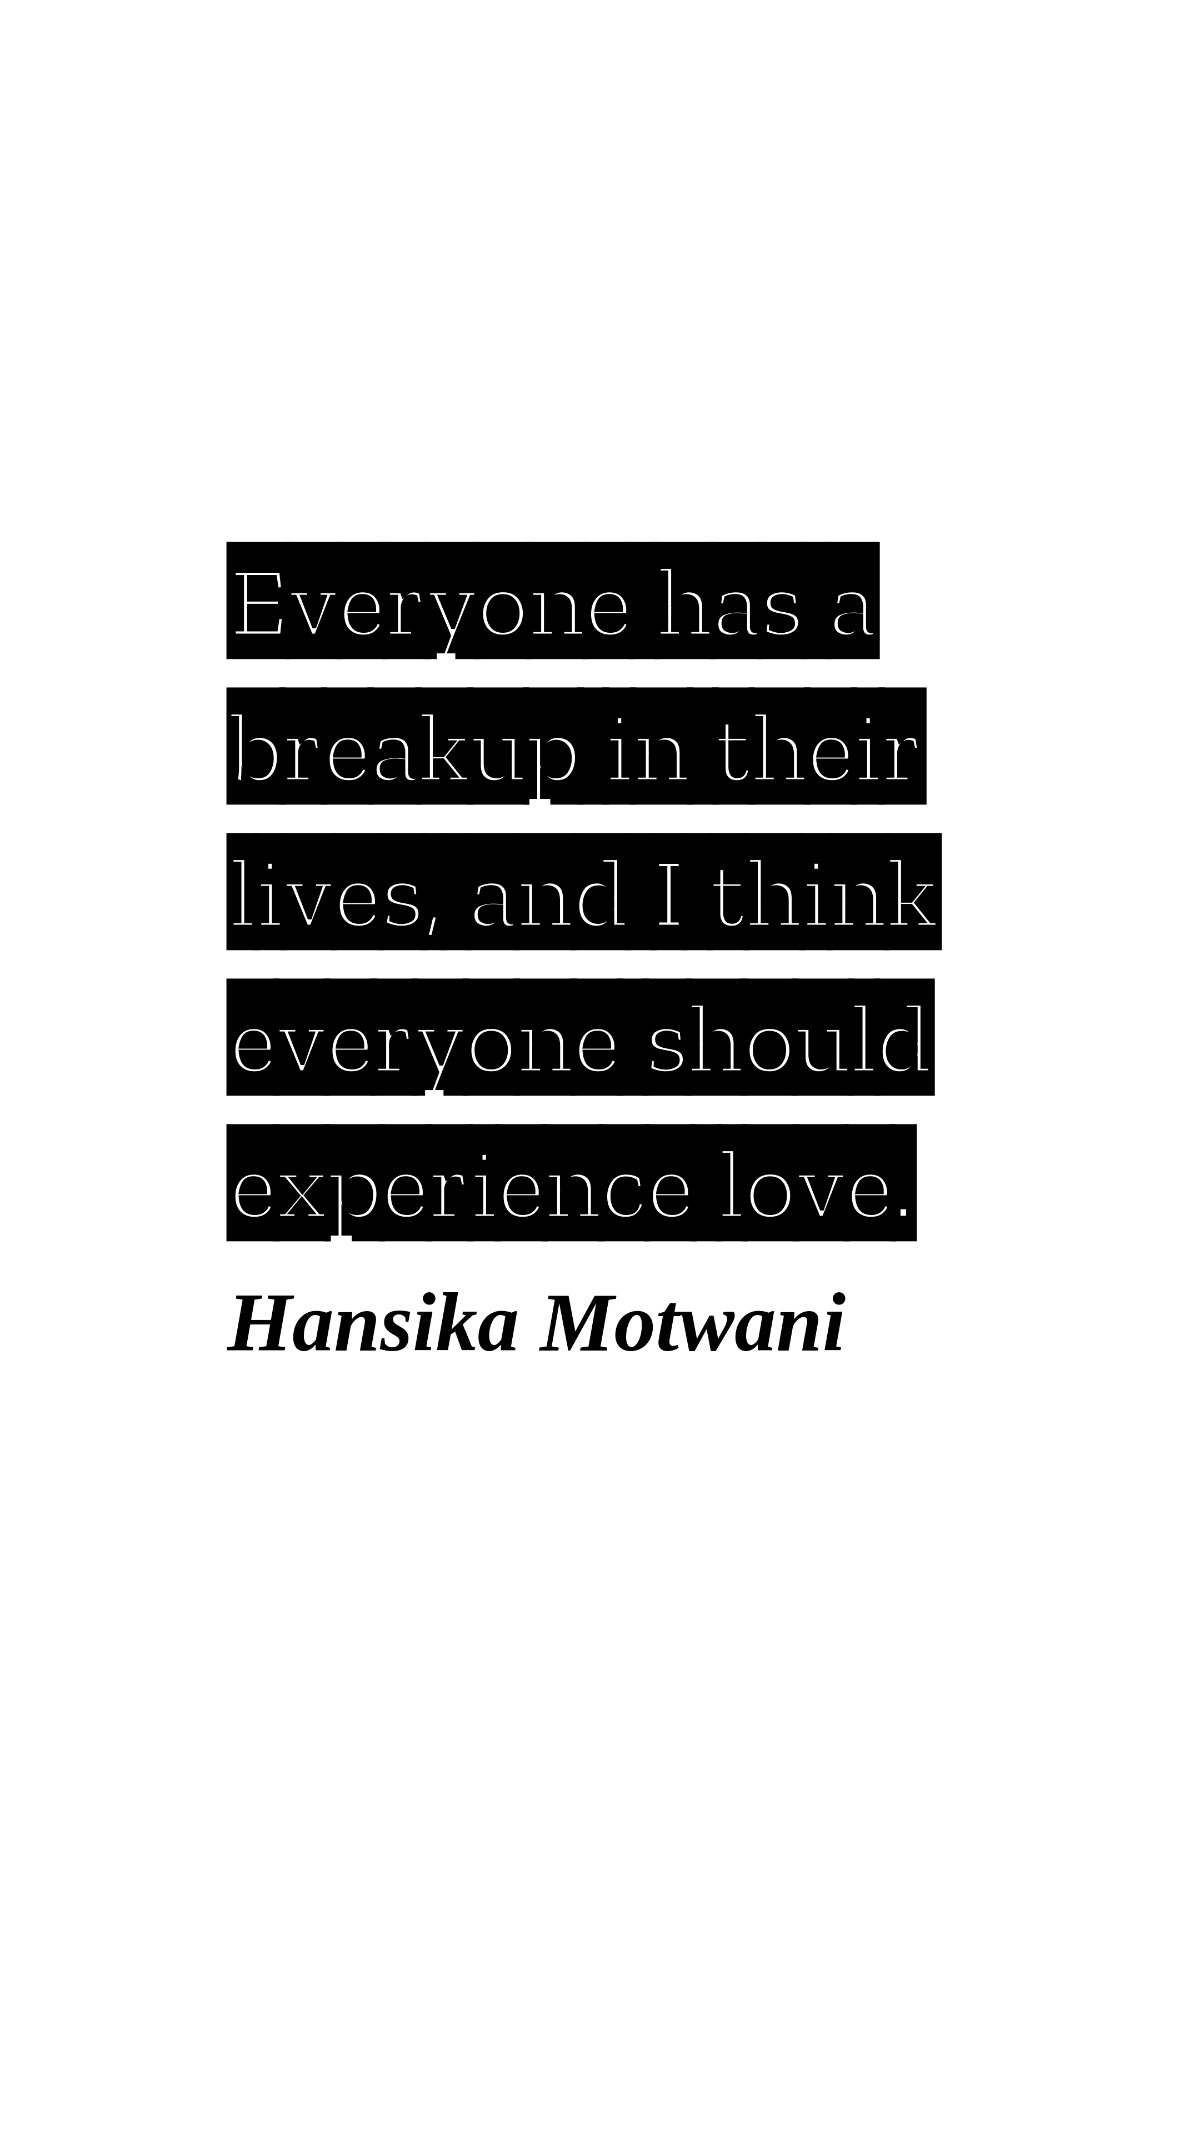 Free Hansika Motwani - Everyone has a breakup in their lives, and I think everyone should experience love. Template